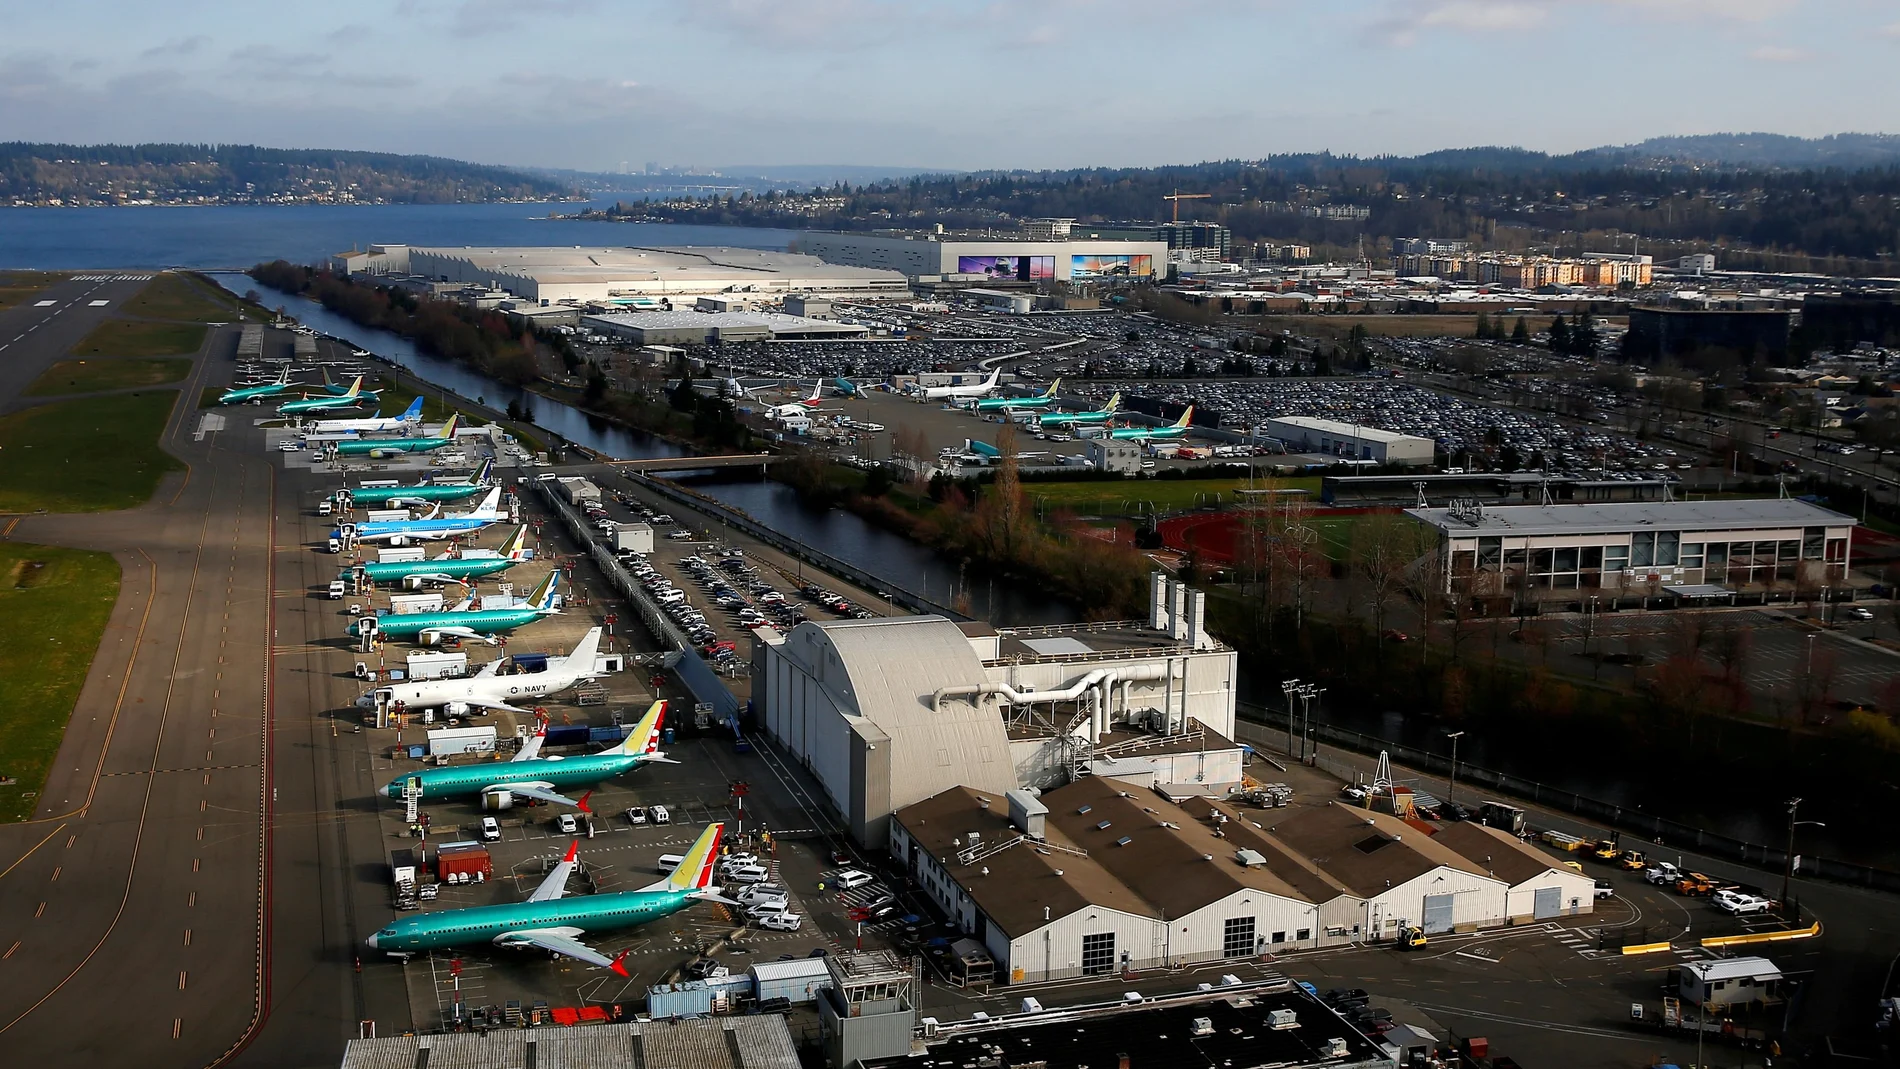 FILE PHOTO: An aerial photo shows Boeing airplanes, many 737 MAXs, parked on the tarmac at the Boeing Factory in Renton